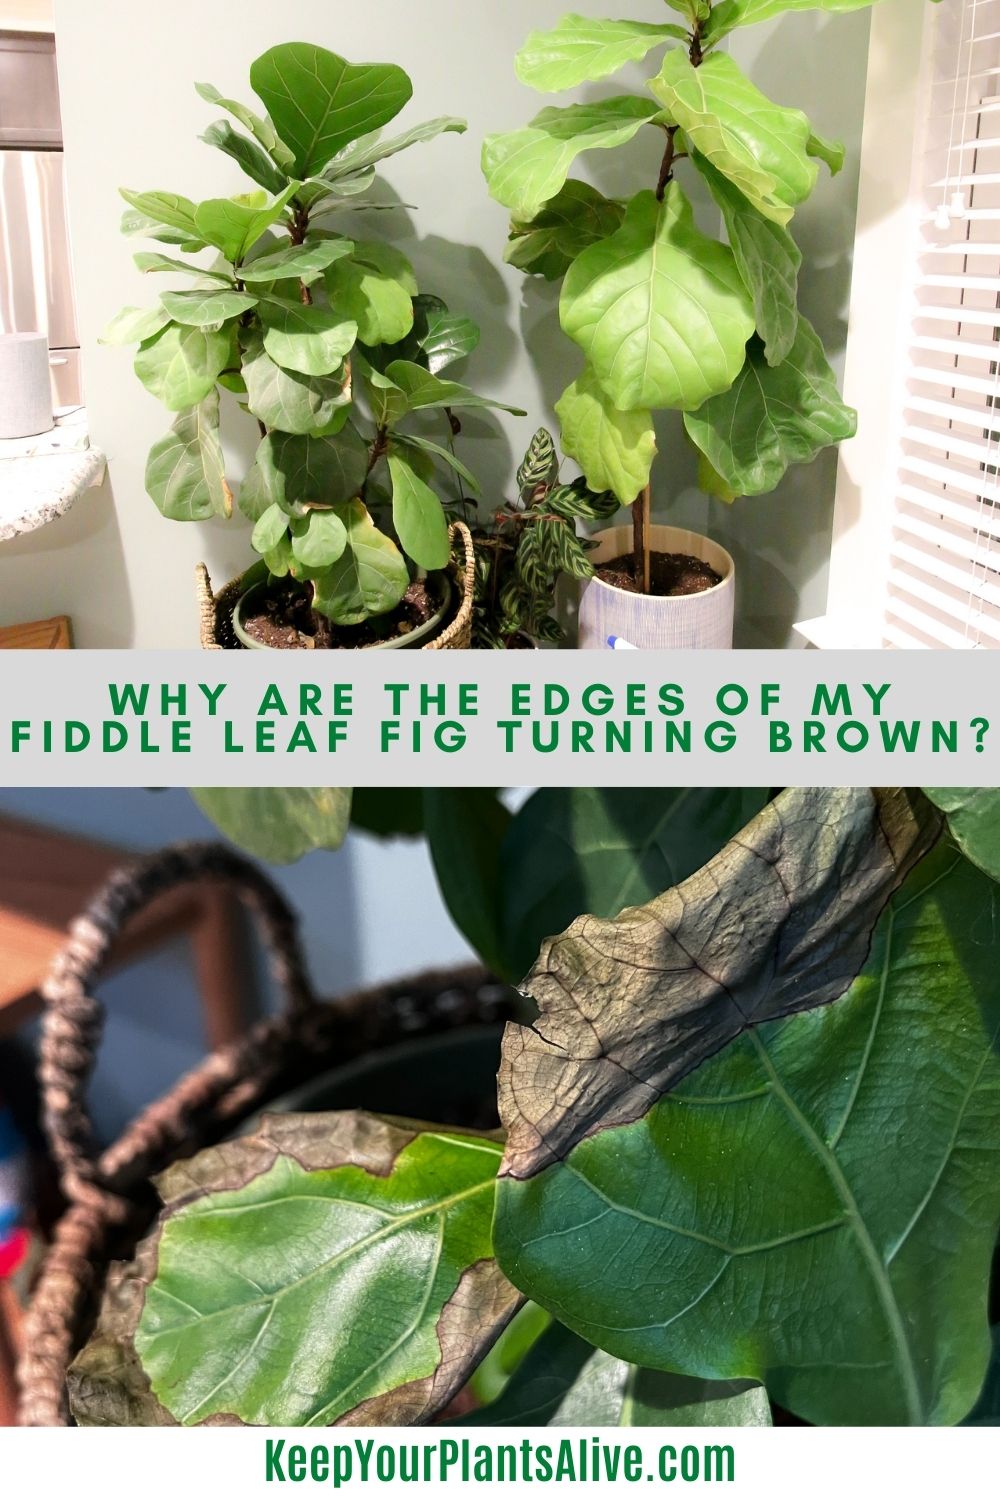 kupon beton Meander Why are the edges of my fiddle leaf fig turning brown? - keep your plants  alive